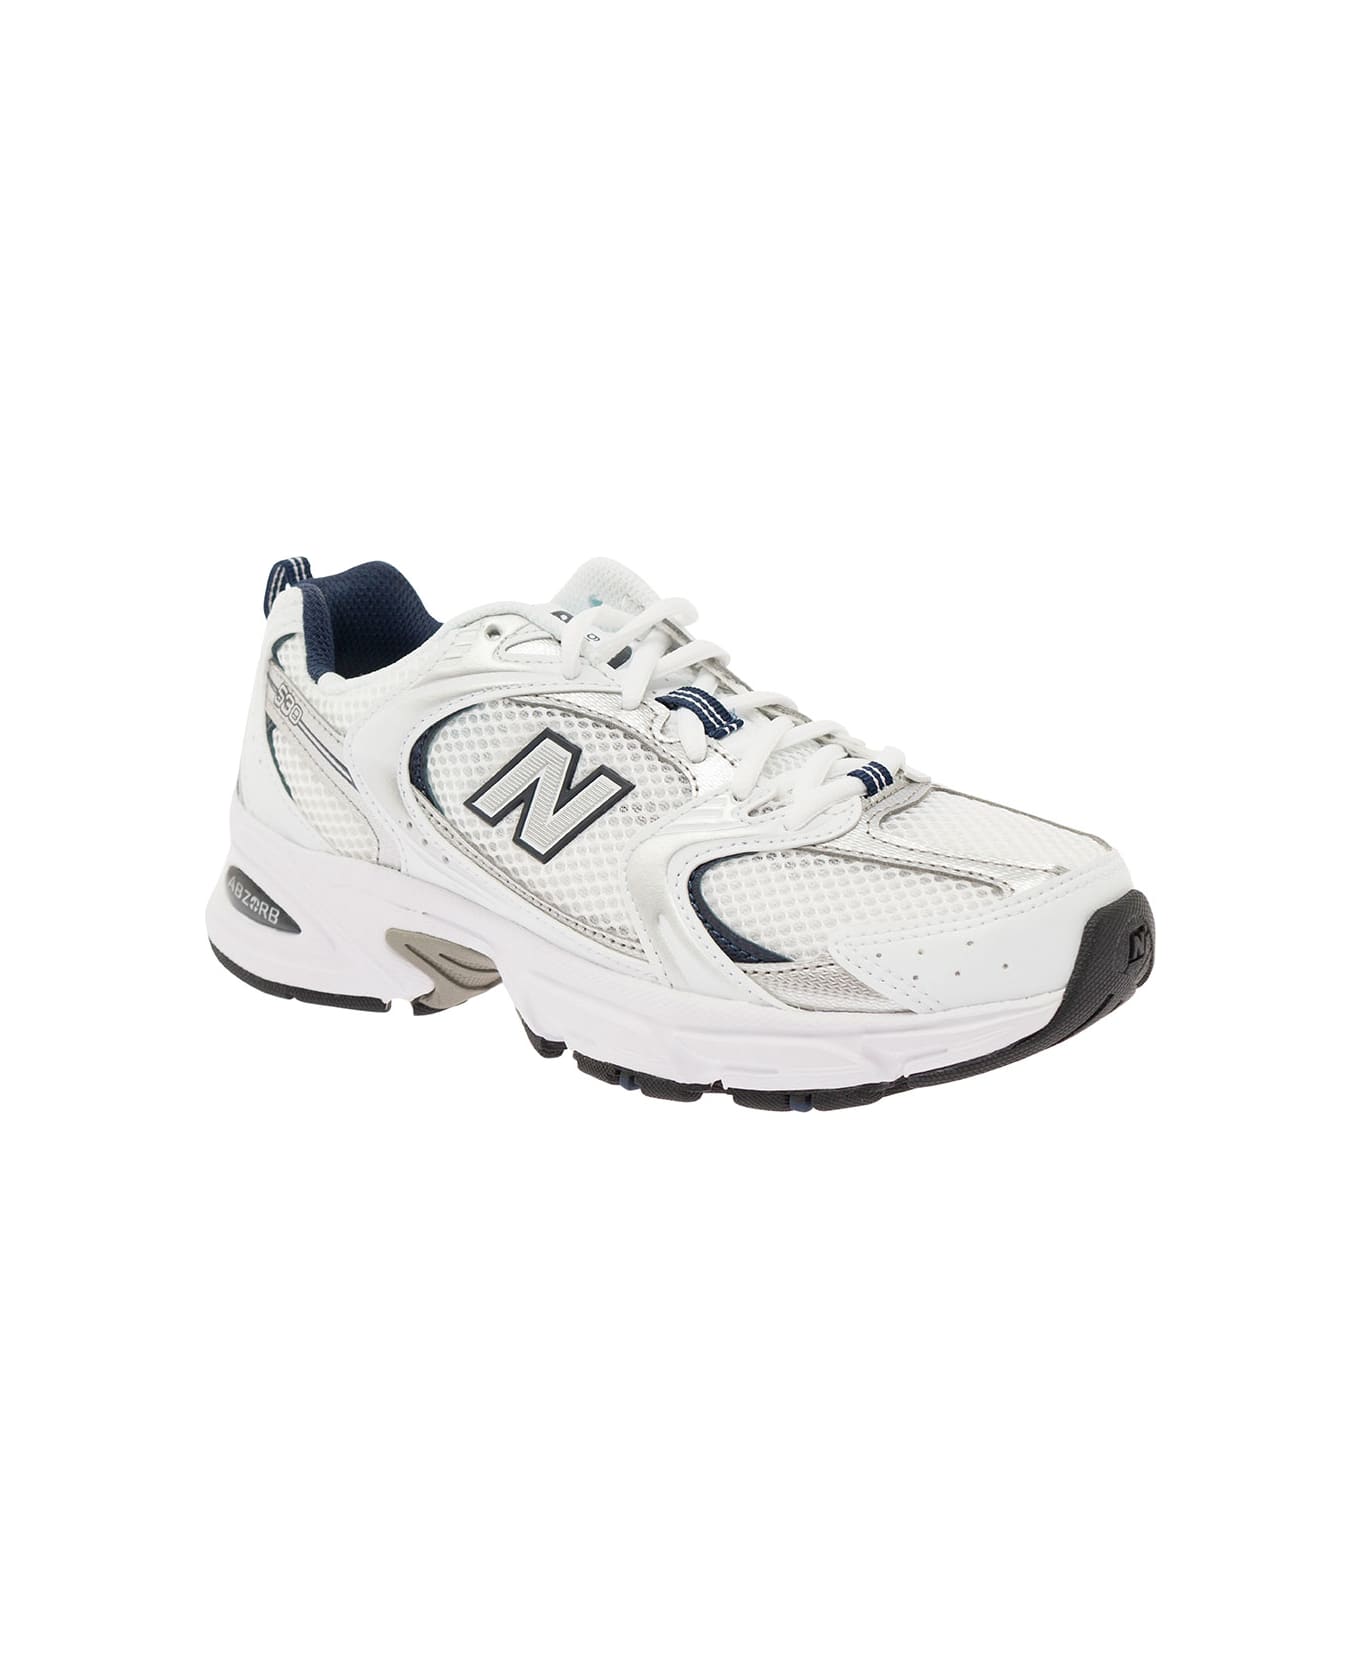 New Balance '530' White And Blue Low Top Sneakers With Logo Patch In Tech Fabric Woman - White スニーカー